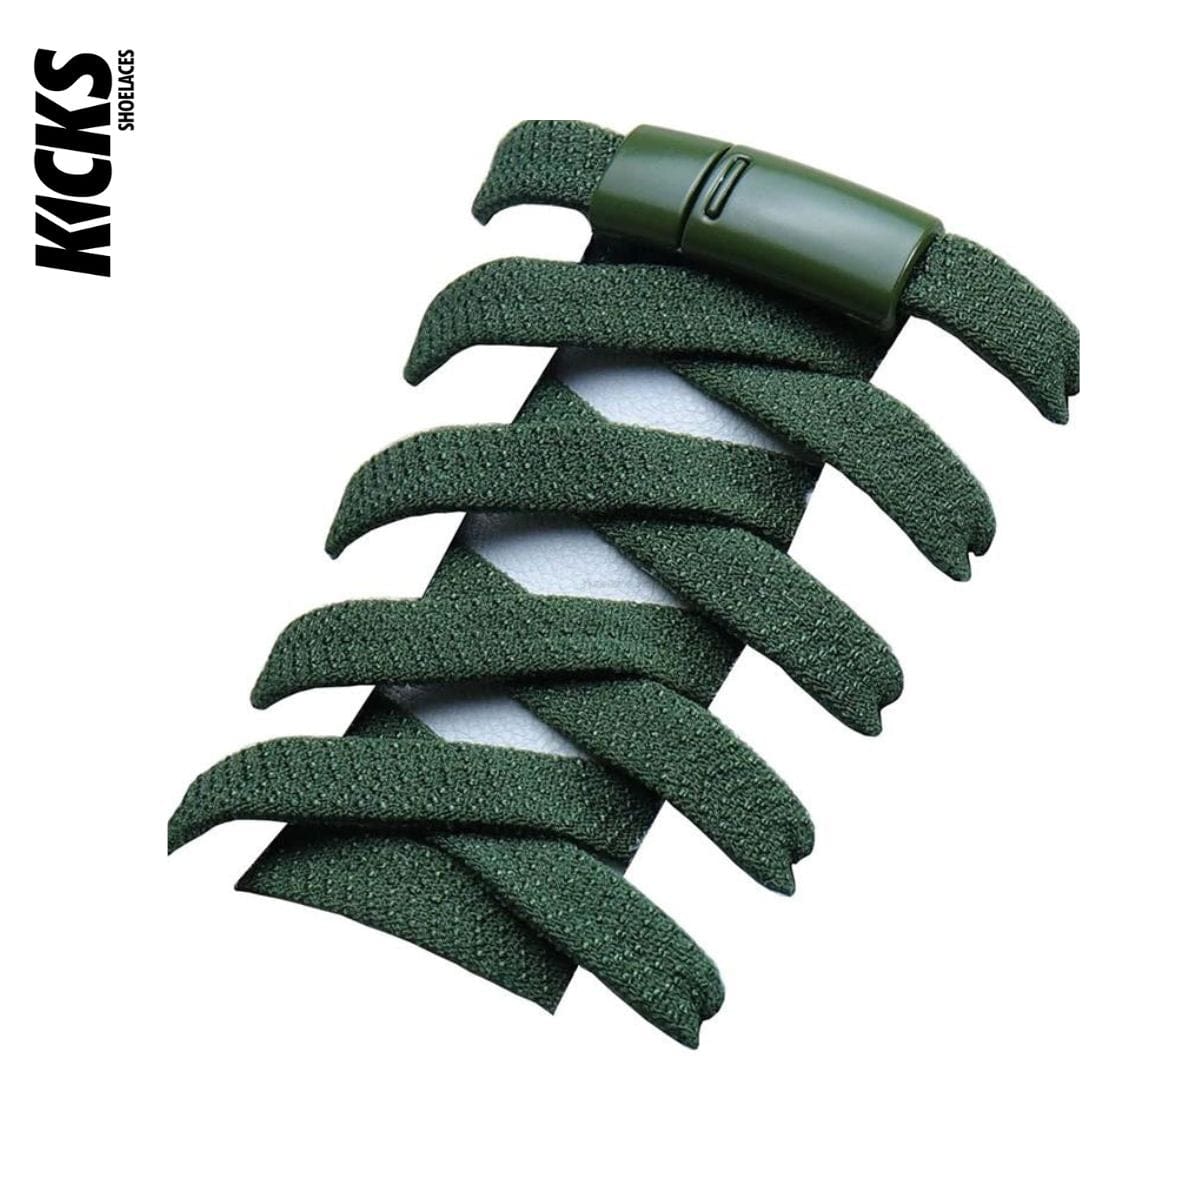 Army Green No-Tie Shoelaces with Magnetic Locks - Kicks Shoelaces